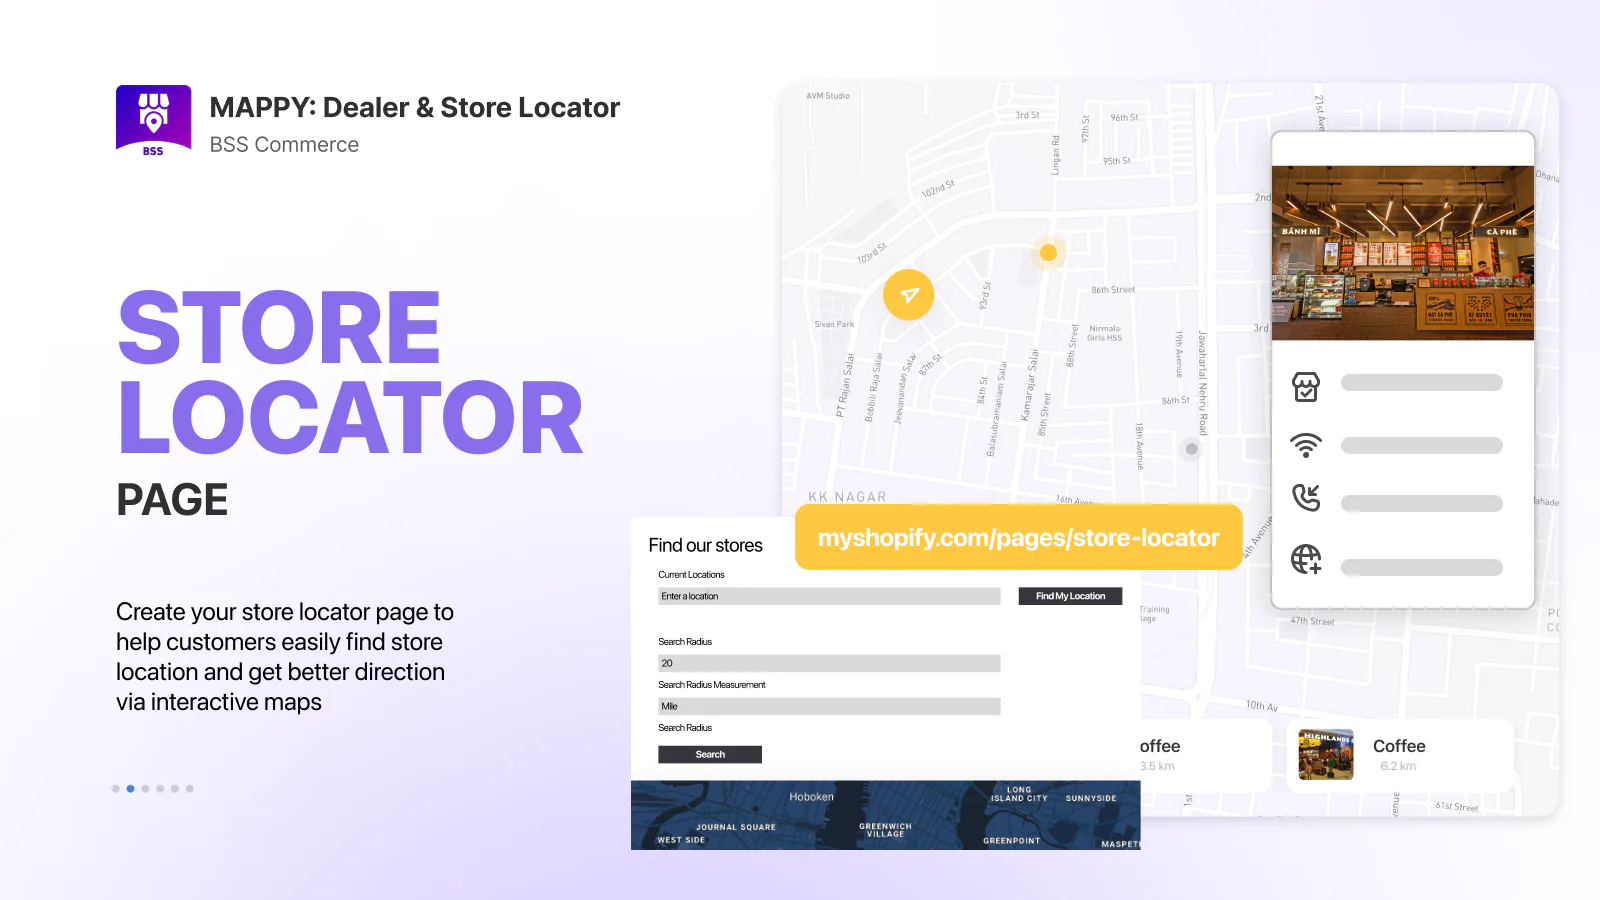 mappy-dealer-and-store-locator-page